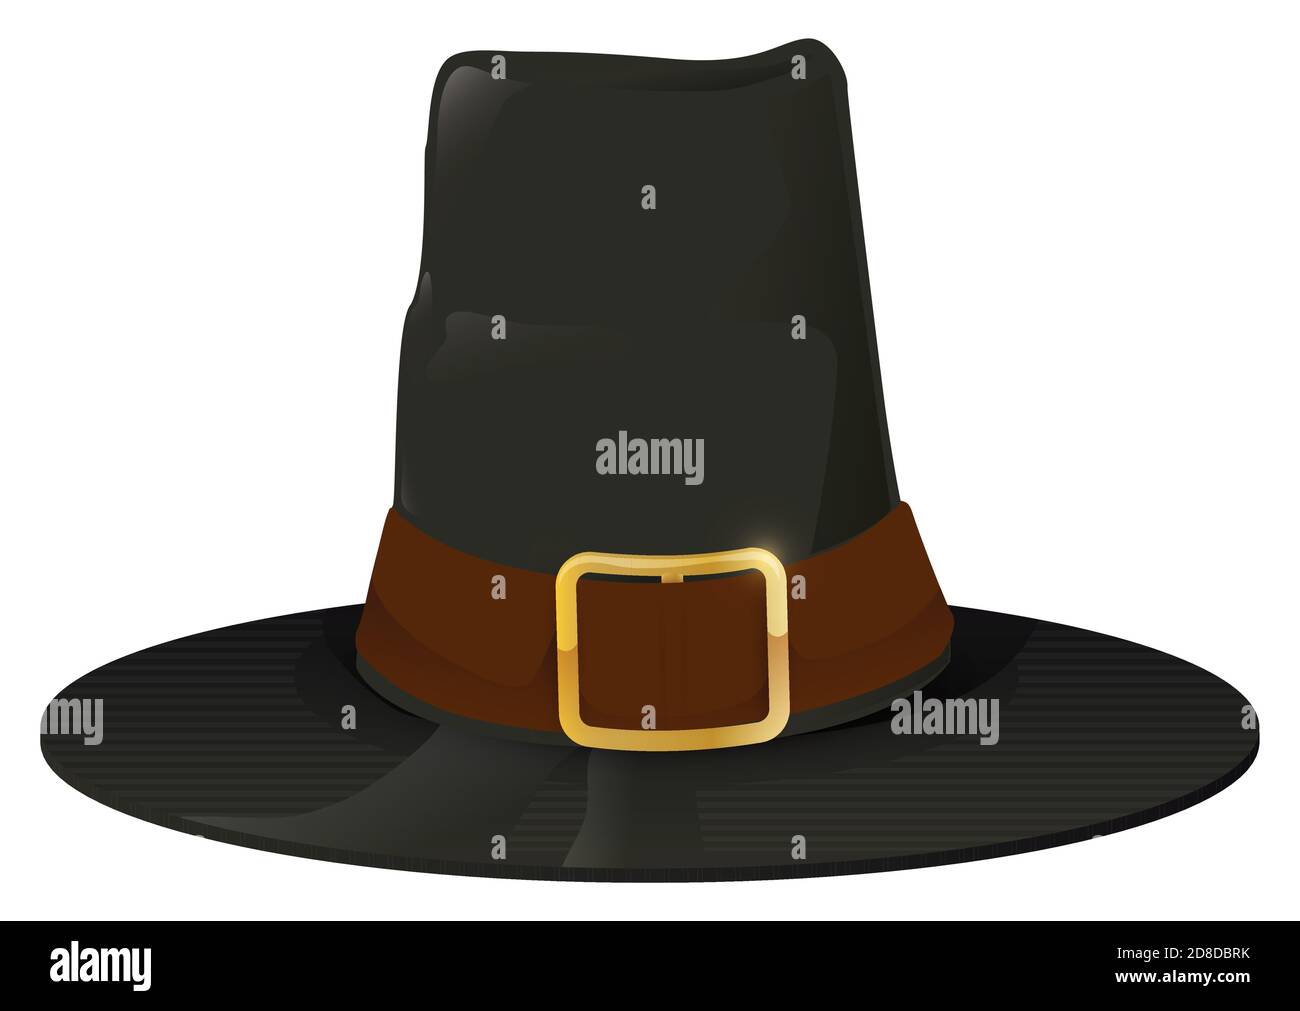 Pilgrim hat with dark and tall shape, leather band and golden buckle, isolated over white background. Stock Vector